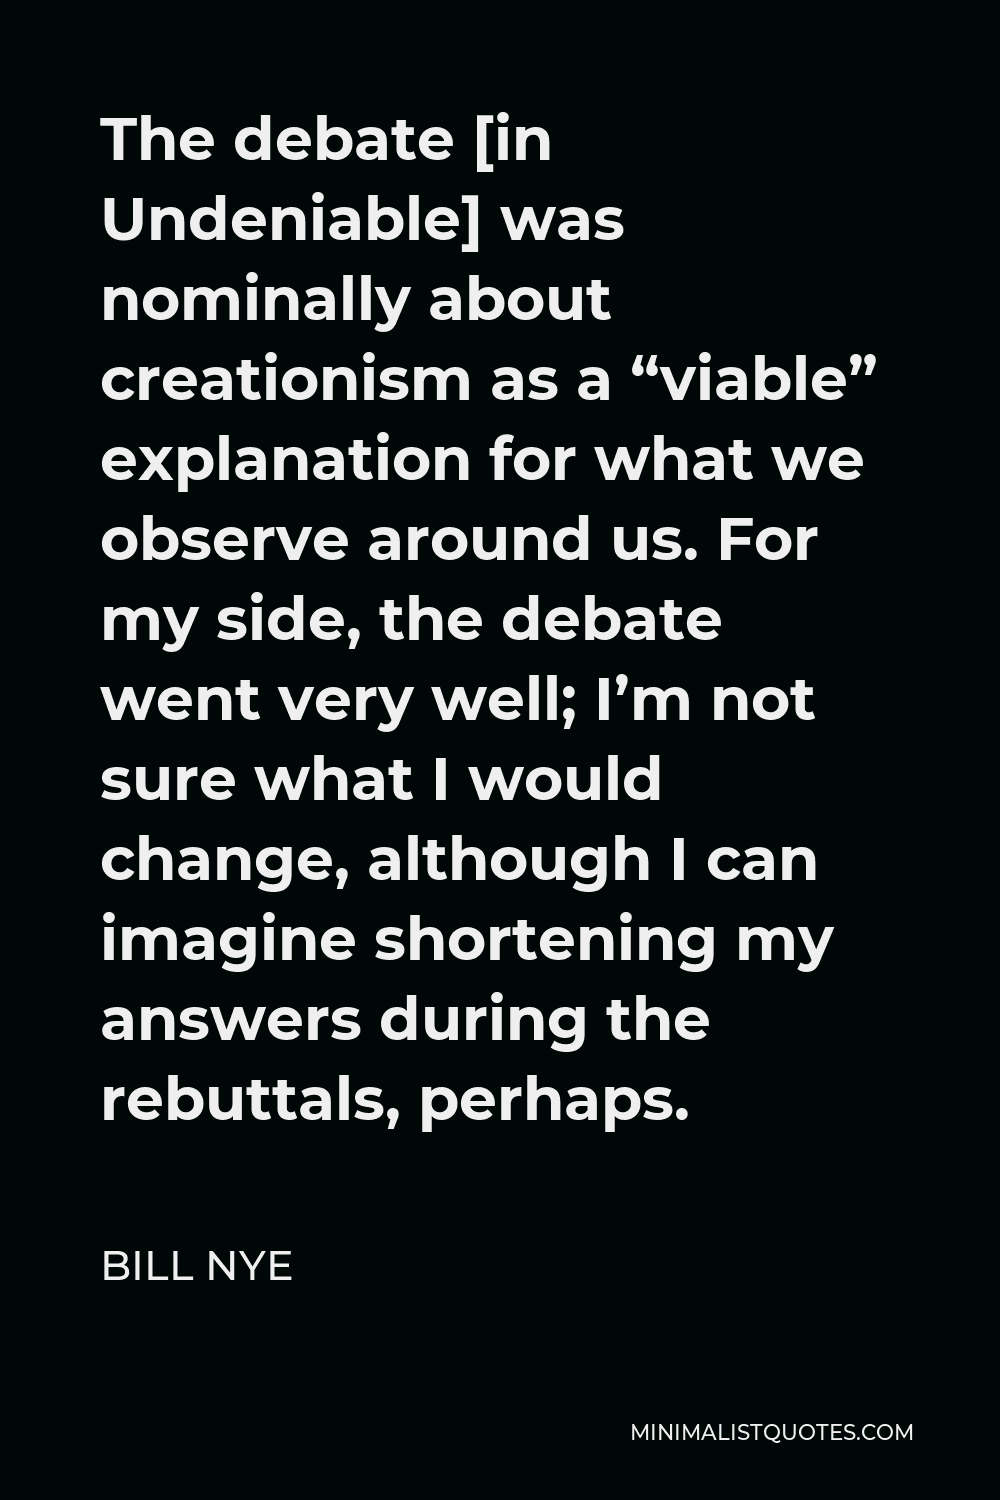 Bill Nye Quote - The debate [in Undeniable] was nominally about creationism as a “viable” explanation for what we observe around us. For my side, the debate went very well; I’m not sure what I would change, although I can imagine shortening my answers during the rebuttals, perhaps.